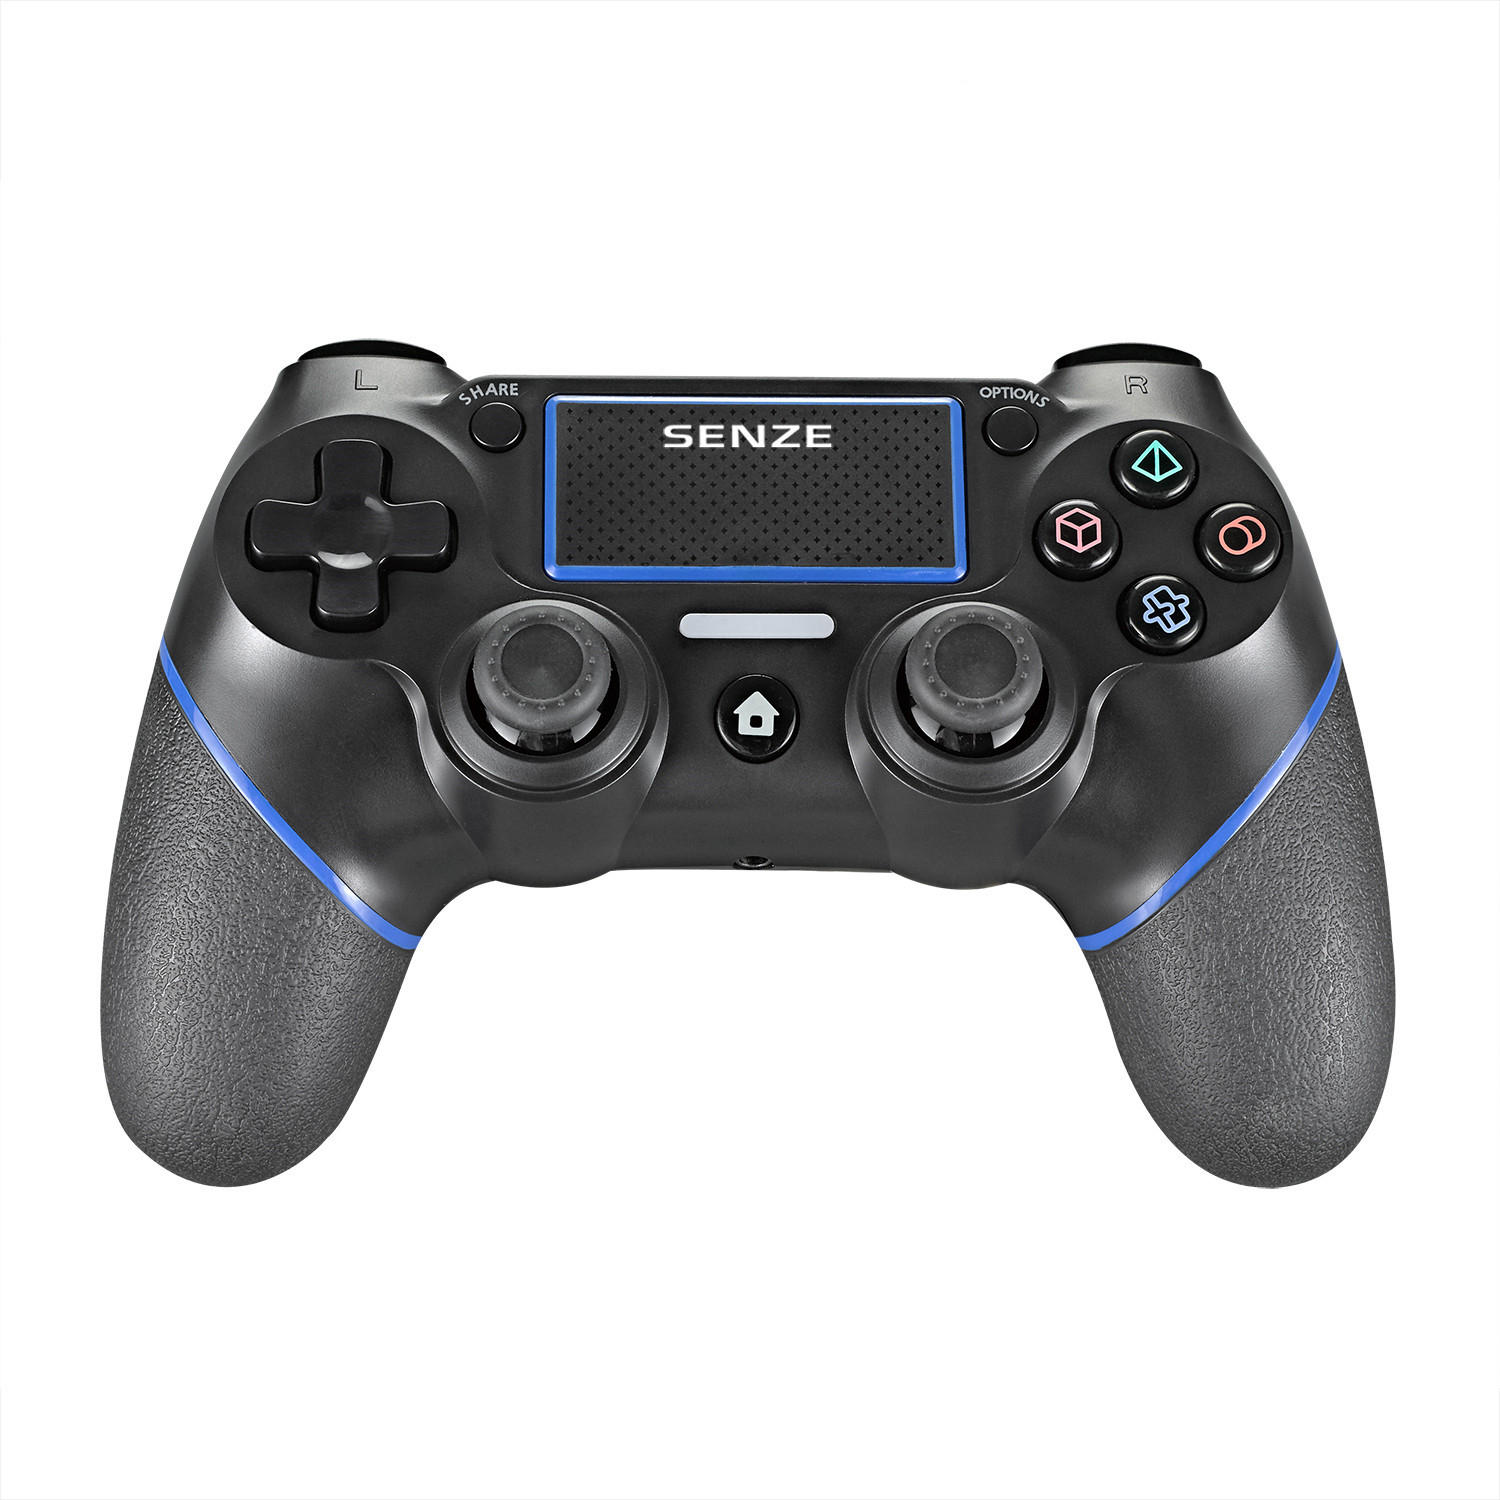 Senze SZ-4002B bluetooth Gamepad Six-axis Sensor Motor Vibration Game Controller for Sony for Playstation 4 3 Game Conso